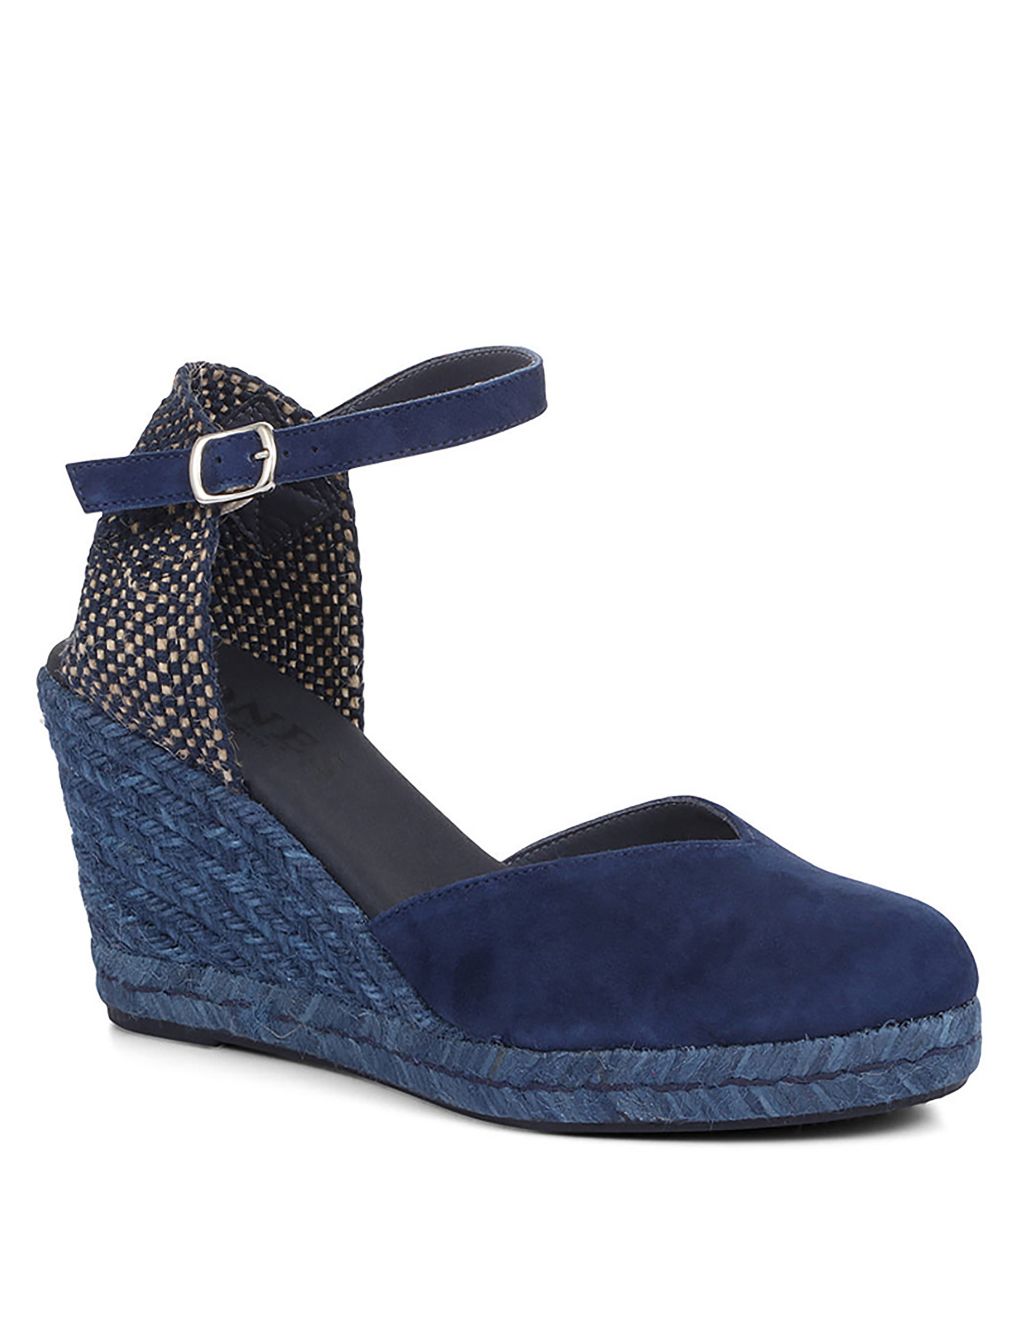 Suede Ankle Strap Wedge Espadrilles image 2